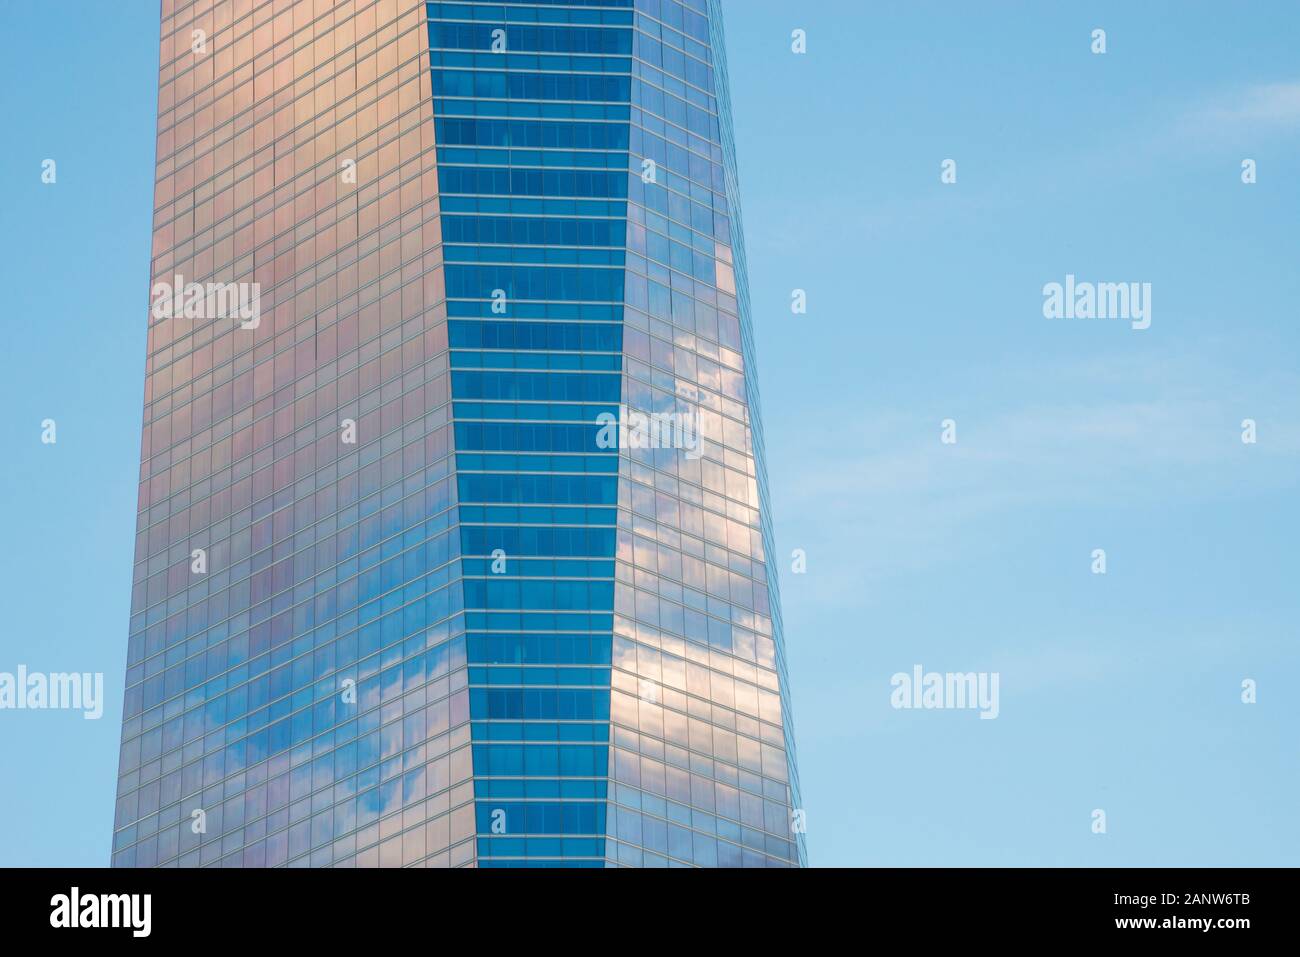 Facade of Cristal tower, by Cesar Pelli. CTBA, Madrid, Spain. Stock Photo